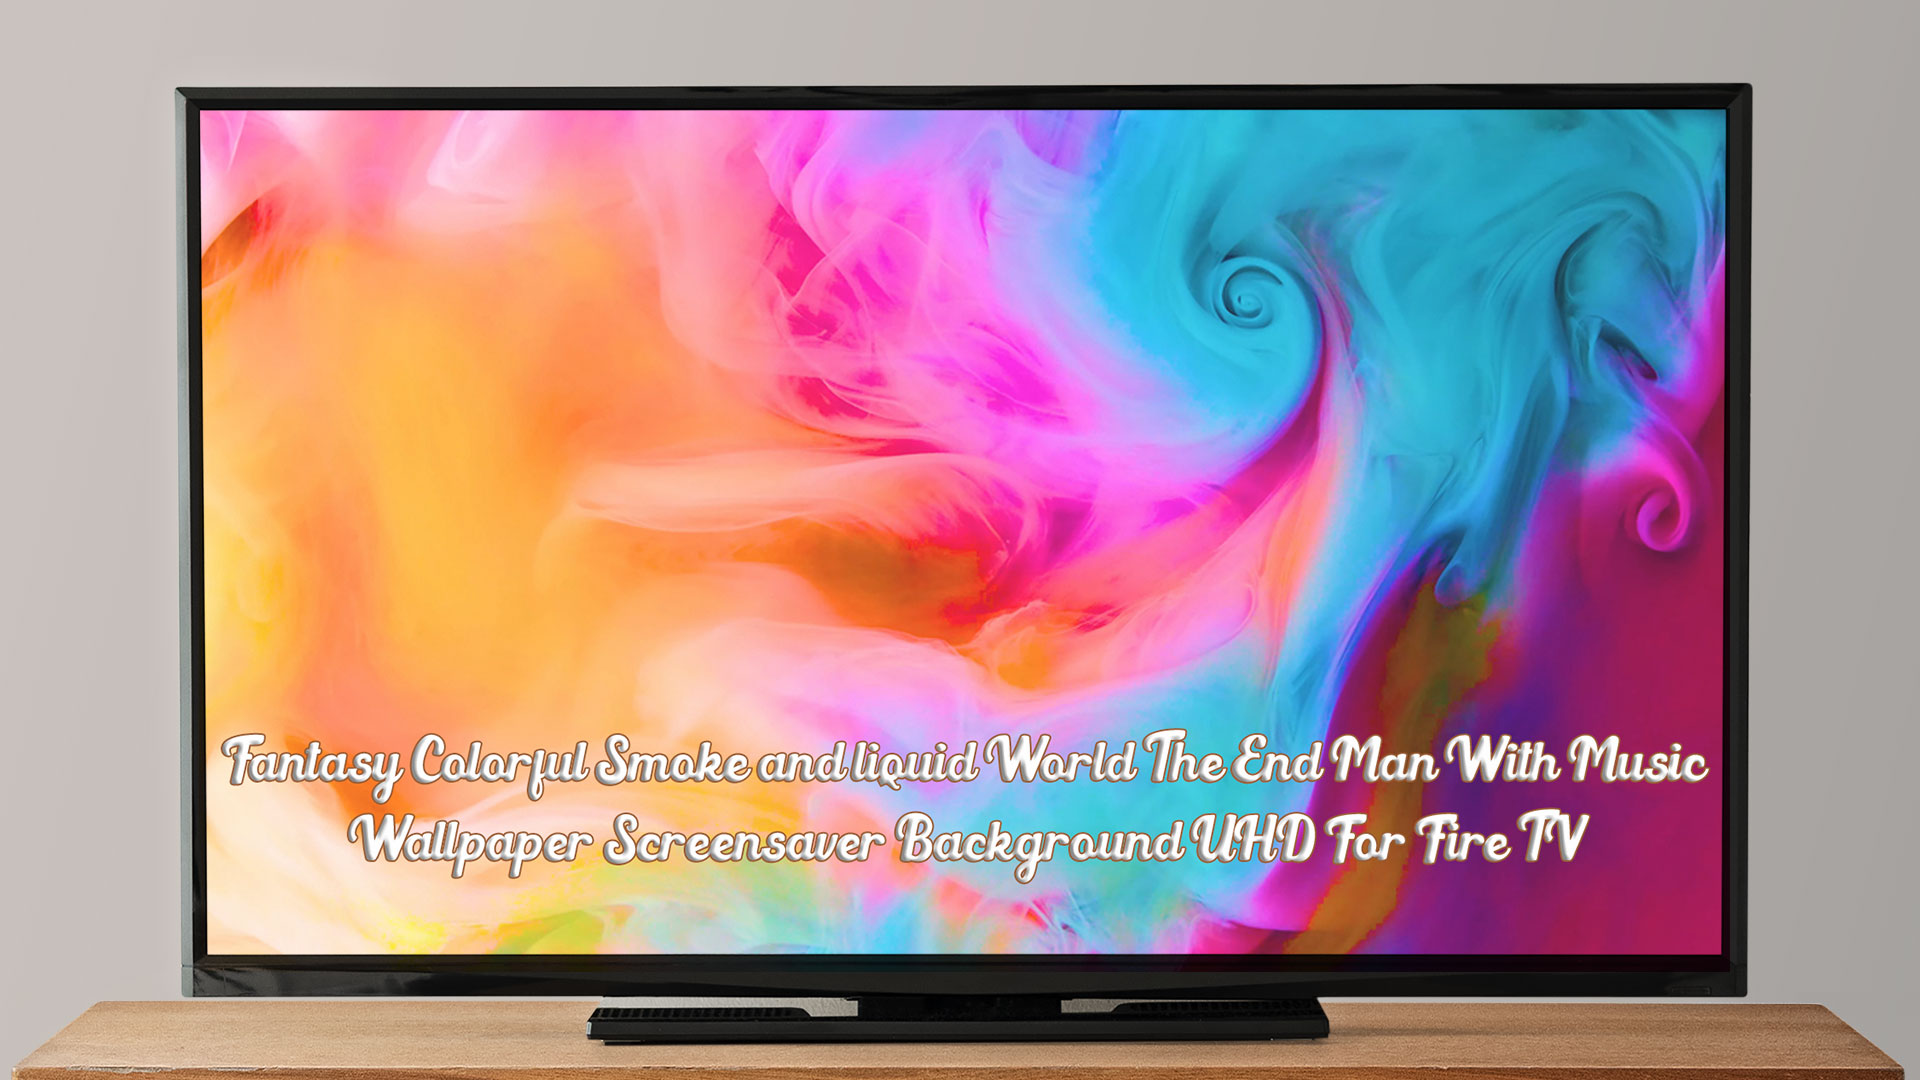 Fantasy Colorful Smoke and liquid World The End Man With Music Wallpaper Screensaver Background UHD For Fire TV - NO ADS